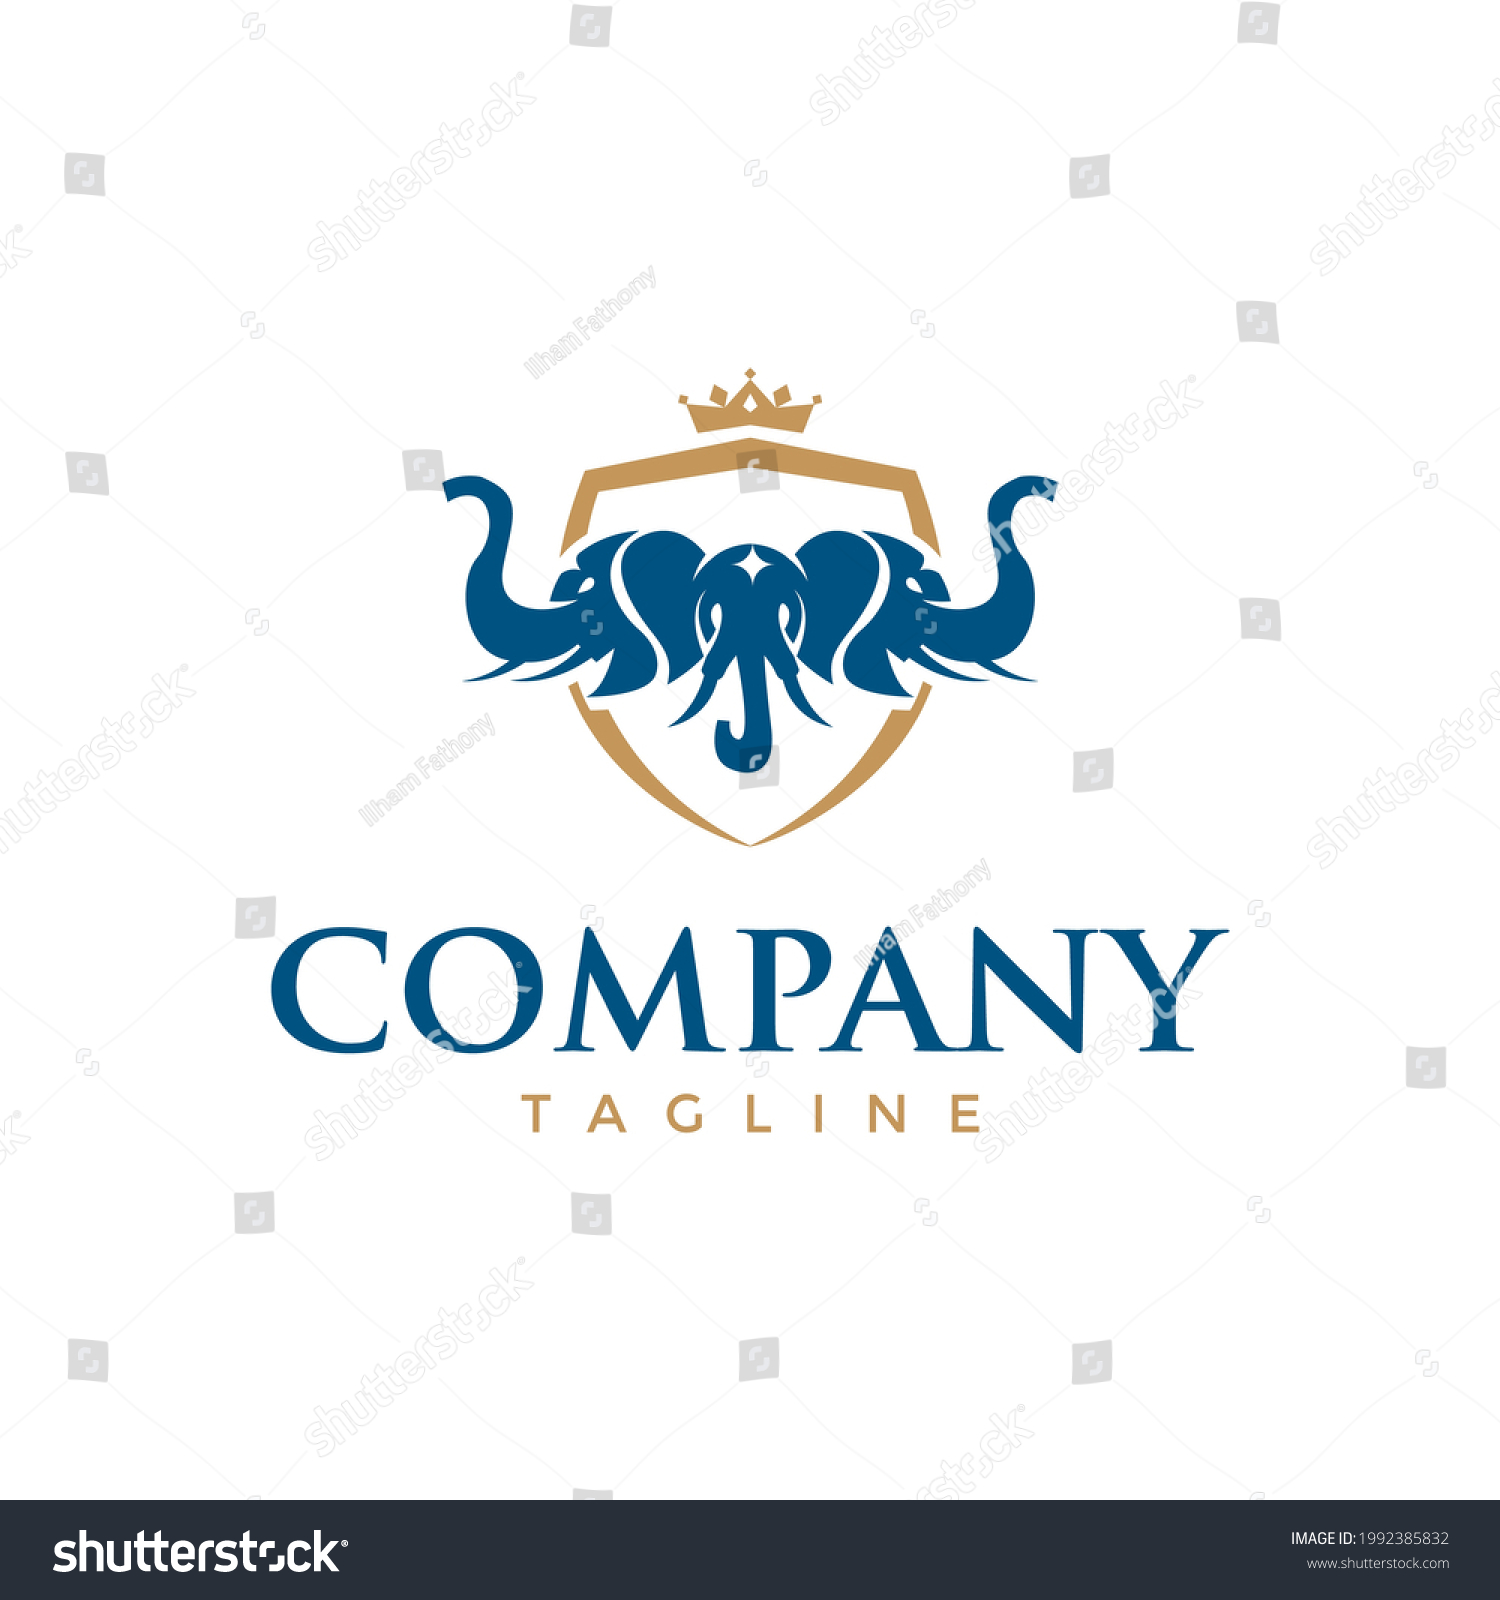 SVG of Three Elephant Head in Shield and Crown Blue Gold Color Logo Vector svg